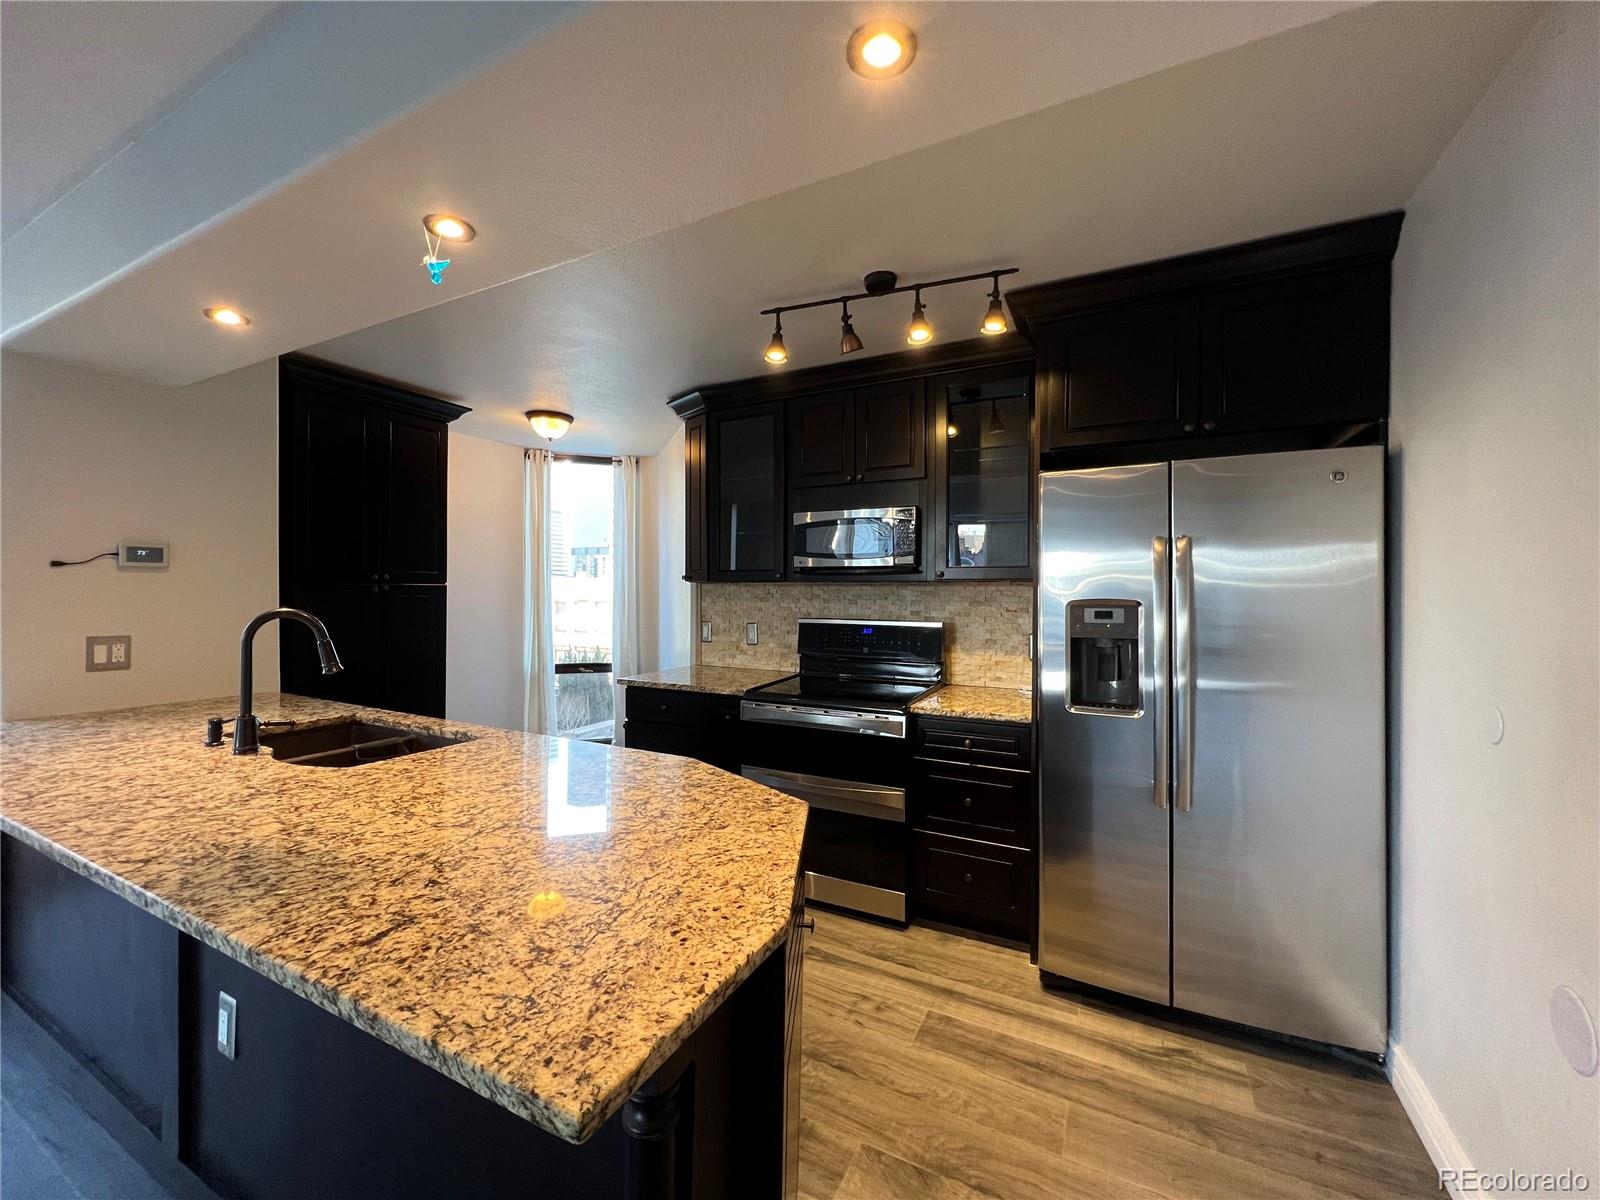 a kitchen with granite countertop kitchen island stainless steel appliances a refrigerator sink and microwave